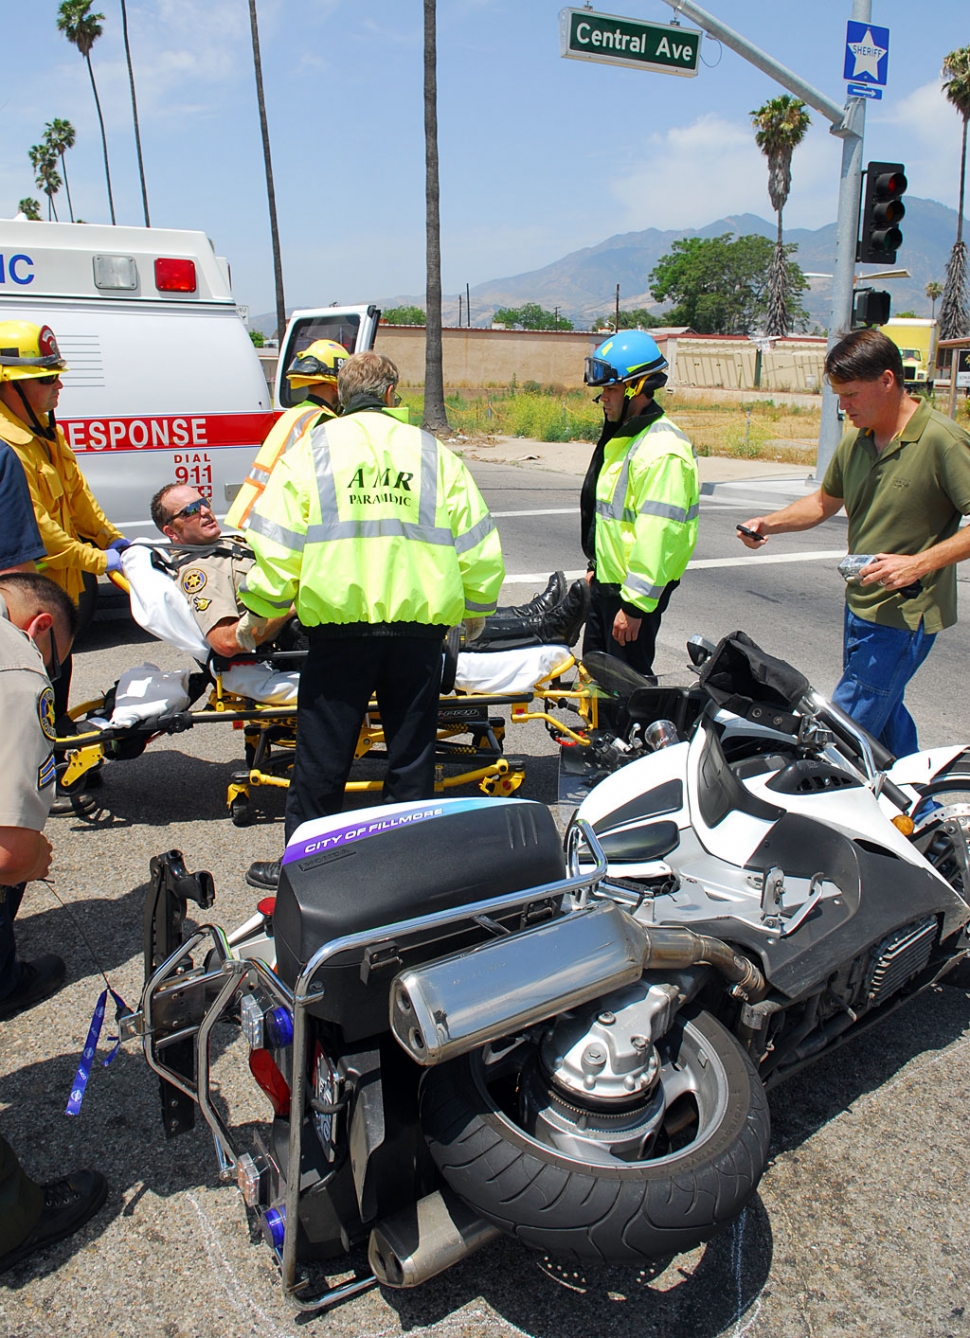 Sheriff’s Deputy Tony Biter suffered minor injuries following a traffi c collision at the intersection of Hwy. 126 and Central Ave., Monday. A motorist accidentally turned in front of his motorcycle. He is recovering at home.